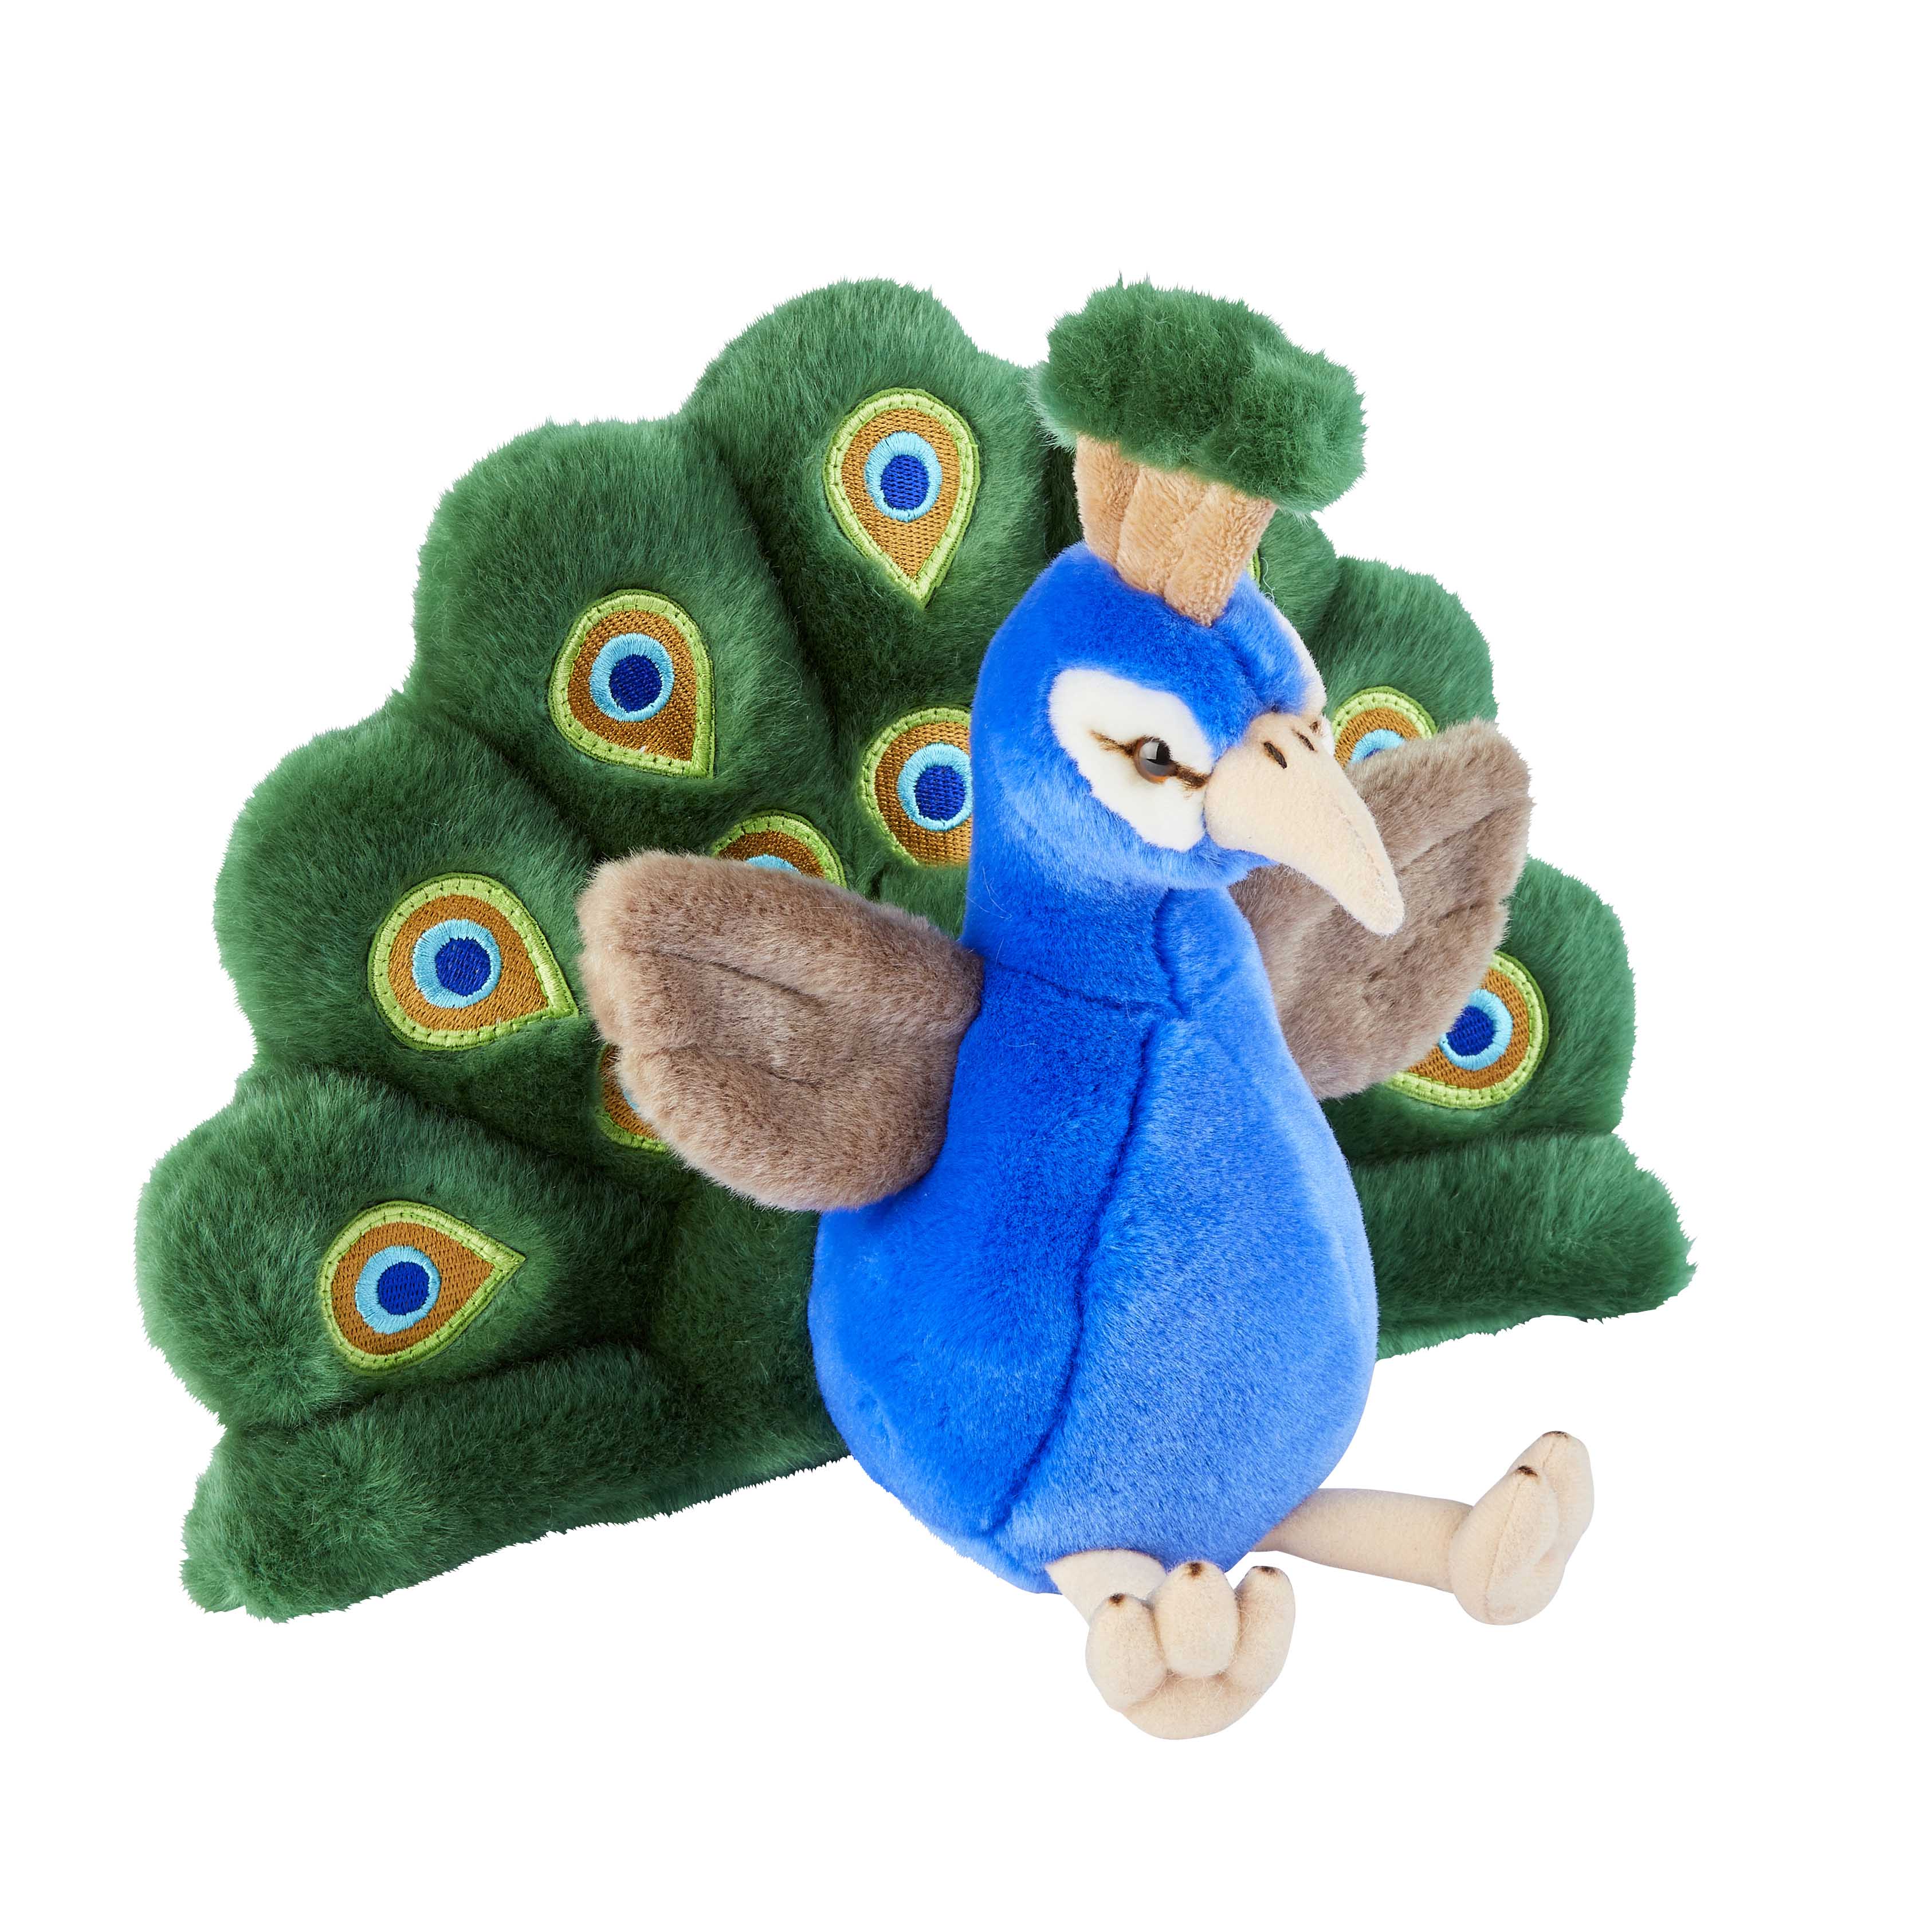 Toy Peacock For Parks